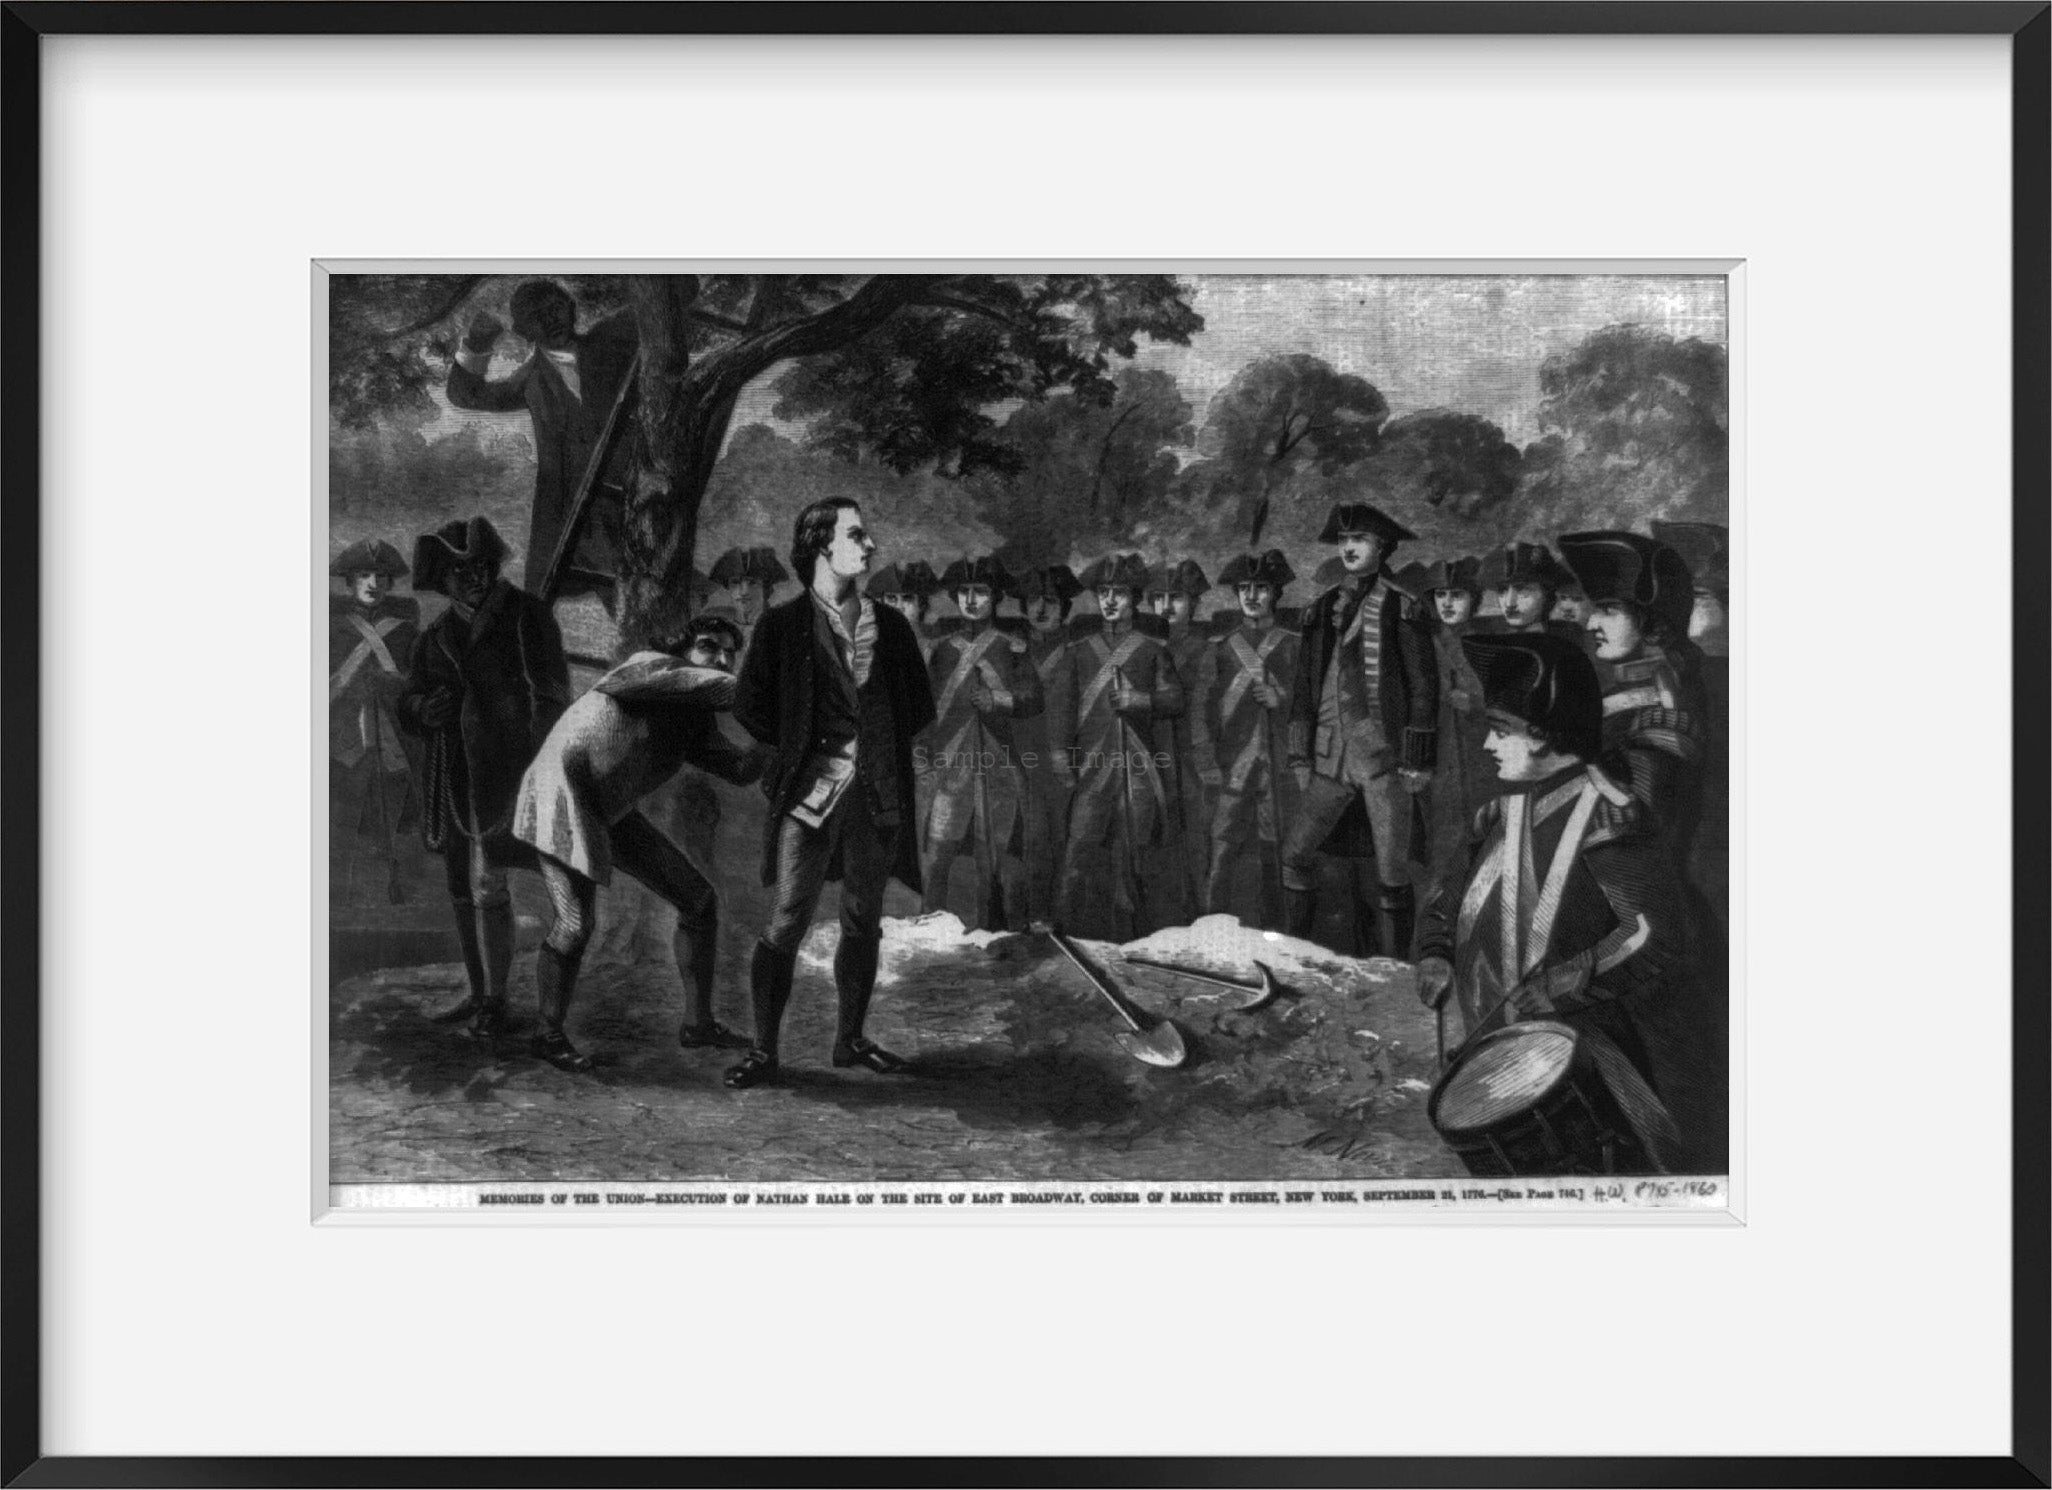 Vintage 1860 photograph: Memories of the Union - execution of Nathan Hale on the